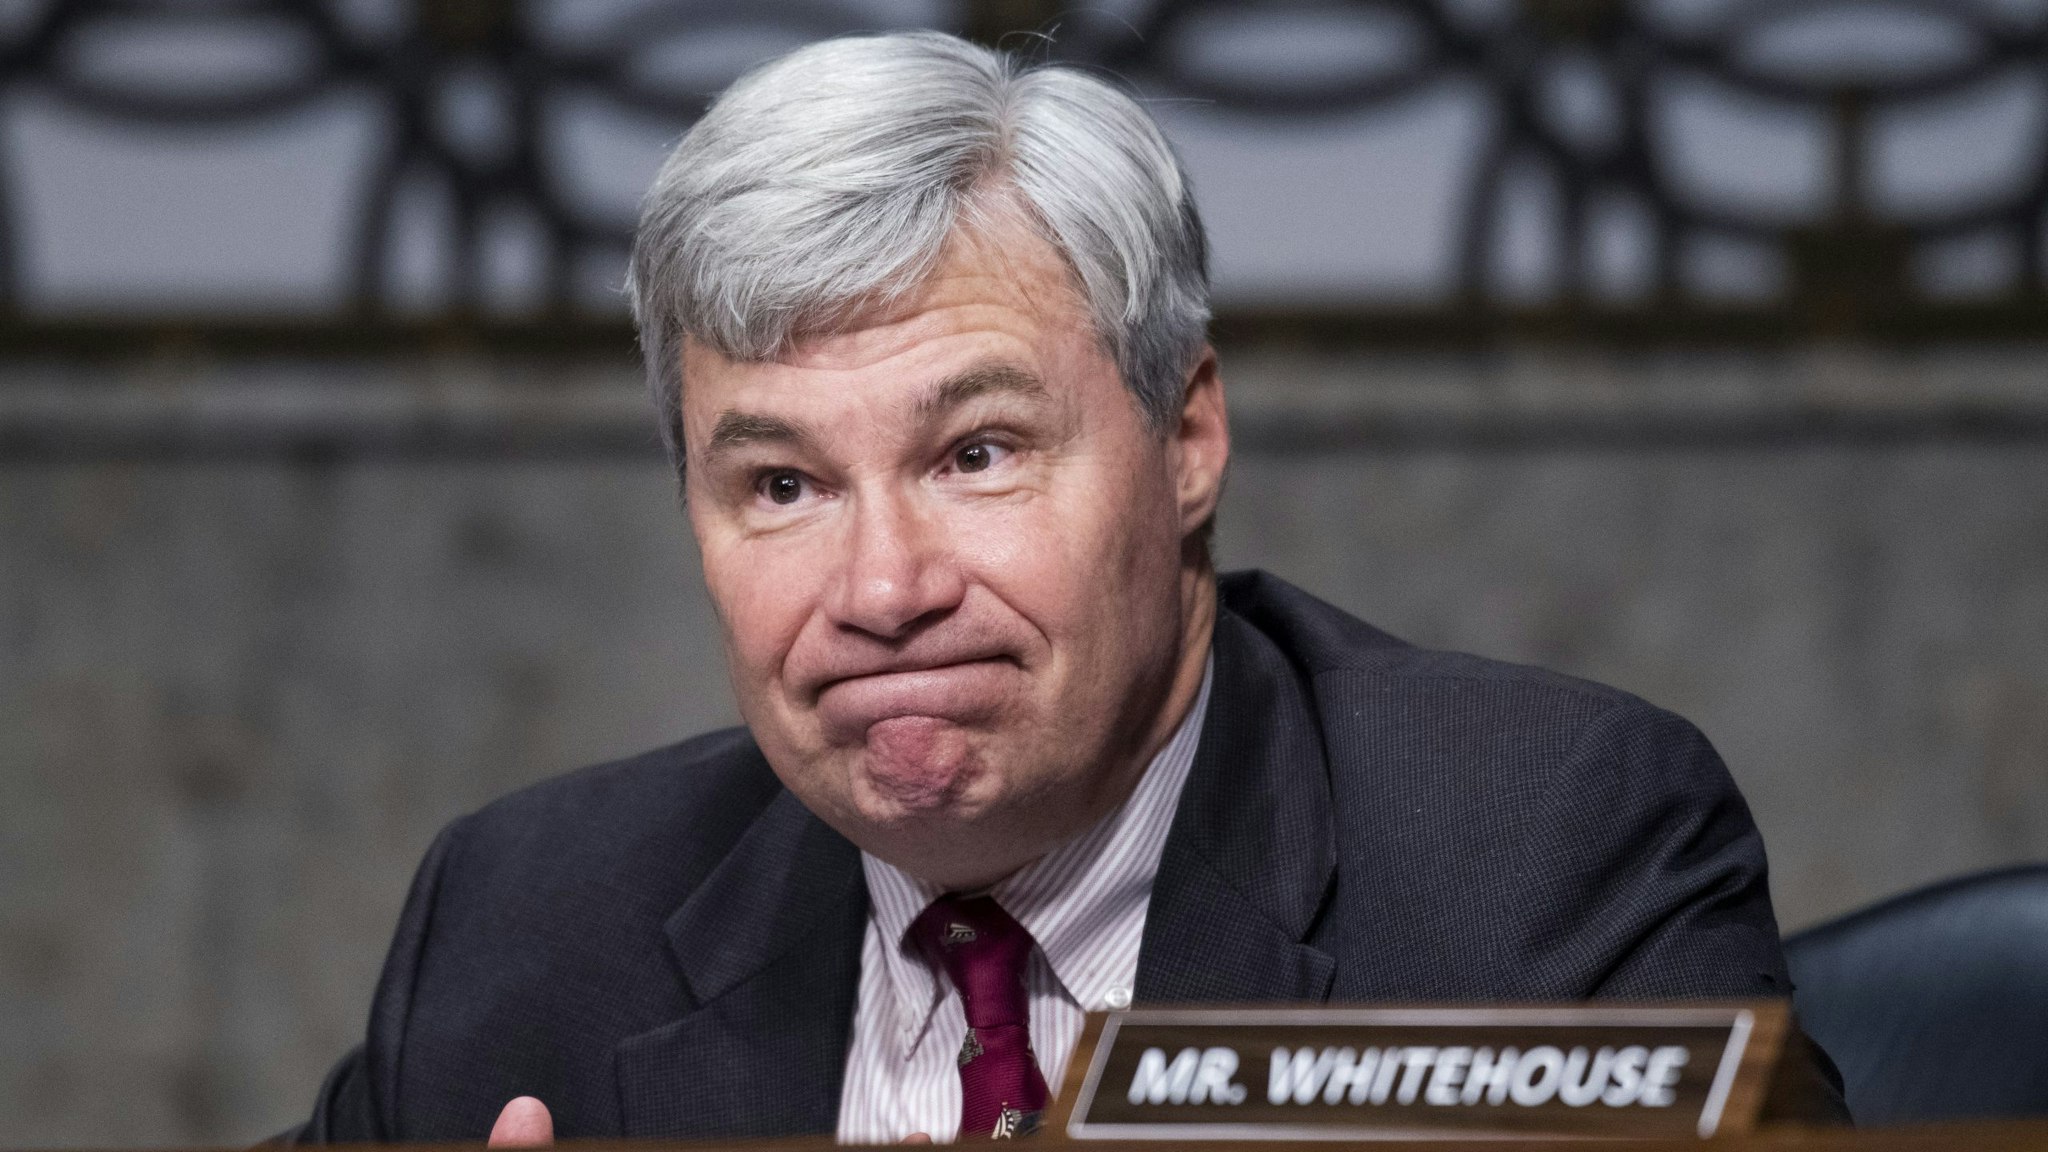 UNITED STATES - APRIL 28: Sen. Sheldon Whitehouse, D-R.I., attends the Senate Judiciary Committee confirmation hearing in Dirksen Senate Office Building in Washington, D.C., on Wednesday, April 28, 2021. Ketanji Brown Jackson, nominee to be U.S. Circuit Judge for the District of Columbia Circuit, and Candace Jackson-Akiwumi, nominee to be U.S. Circuit Judge for the Seventh Circuit, testified on the first panel.